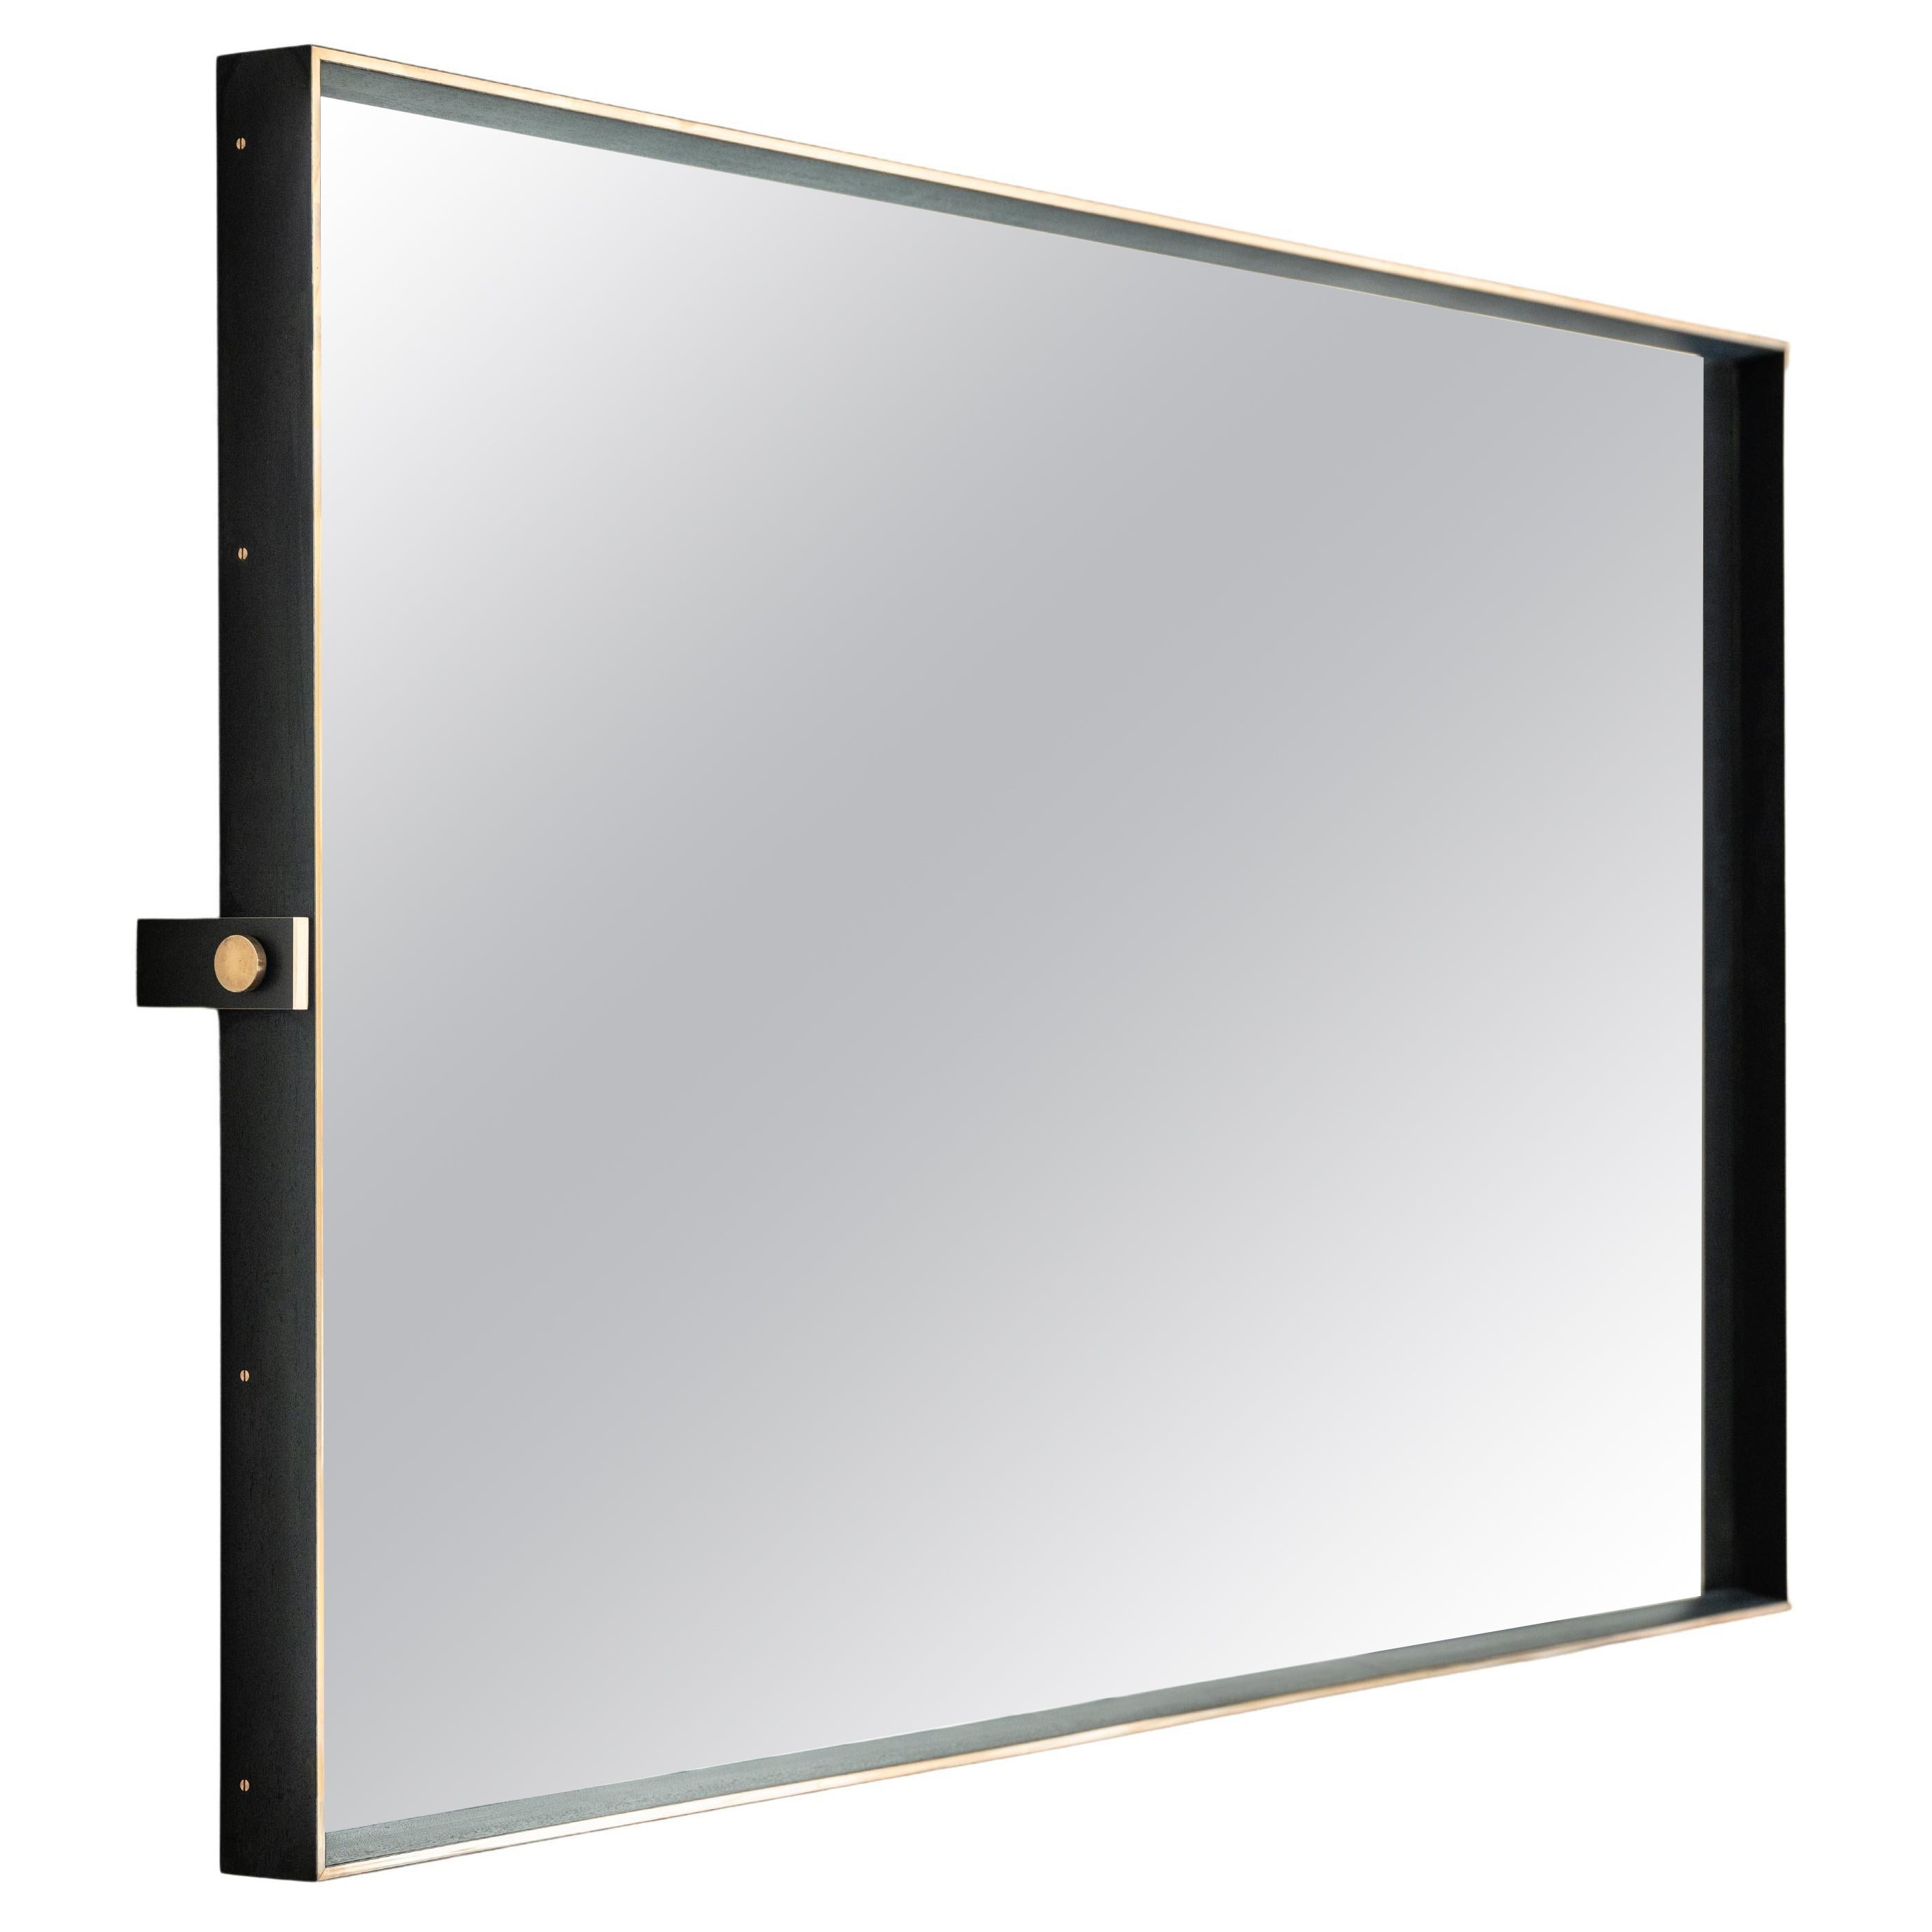 KGBL Starling Mirror with Pivot (Horizontal) For Sale